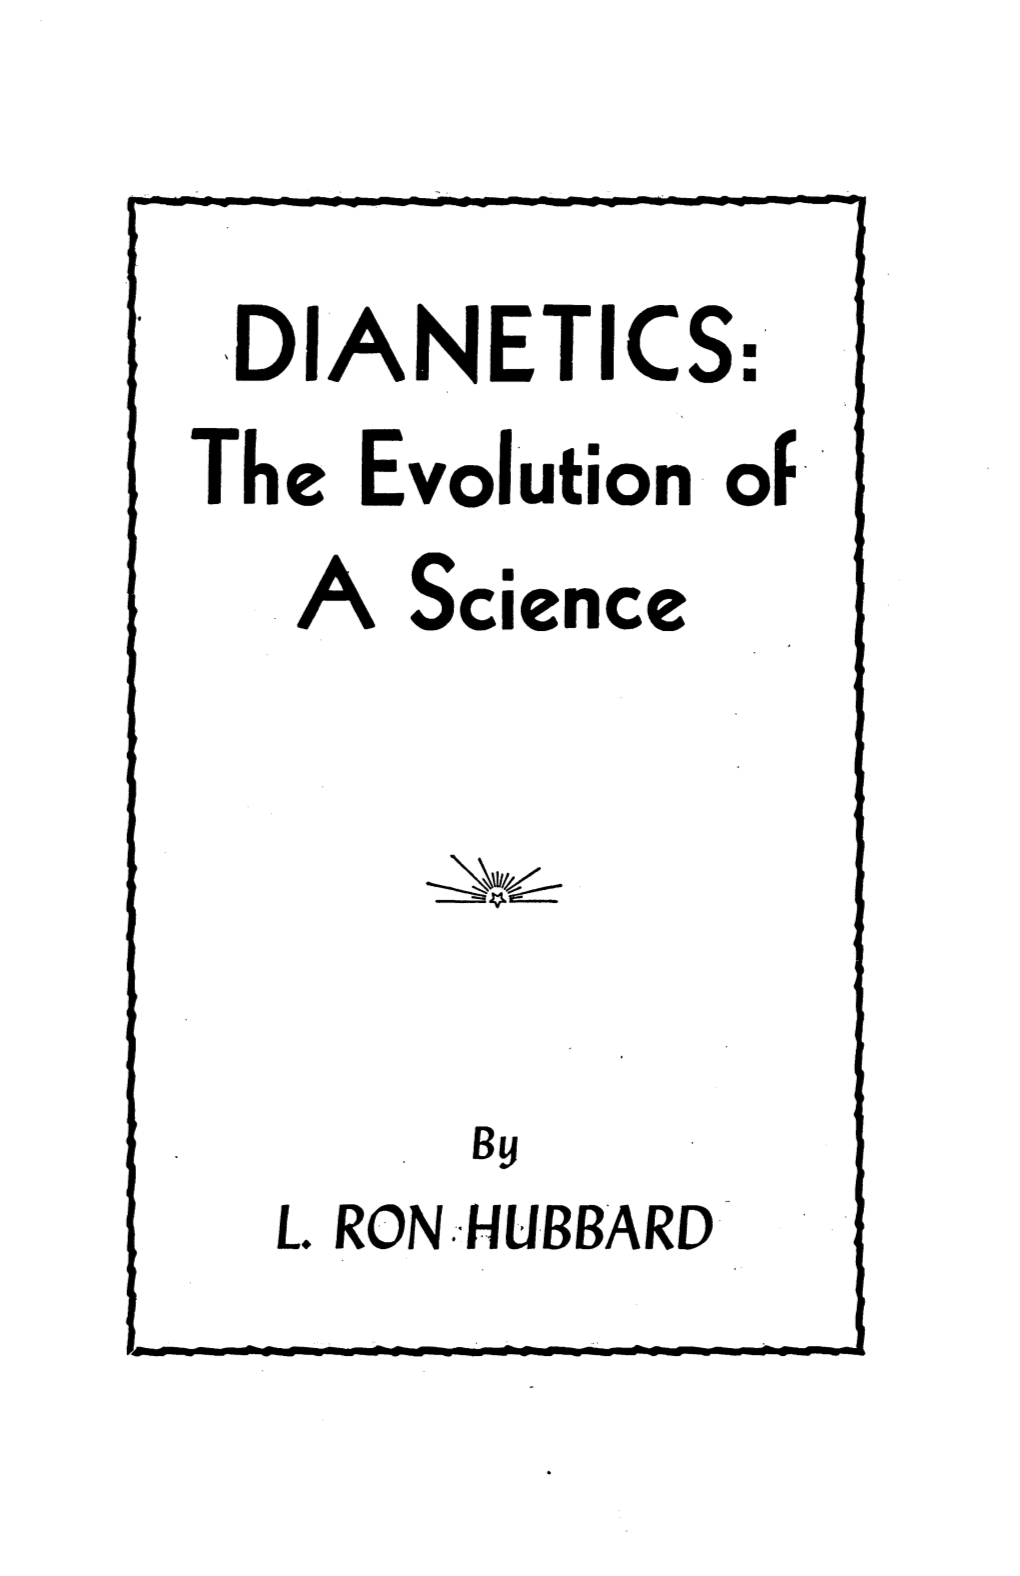 DIANETICS: the Evolution of a Science